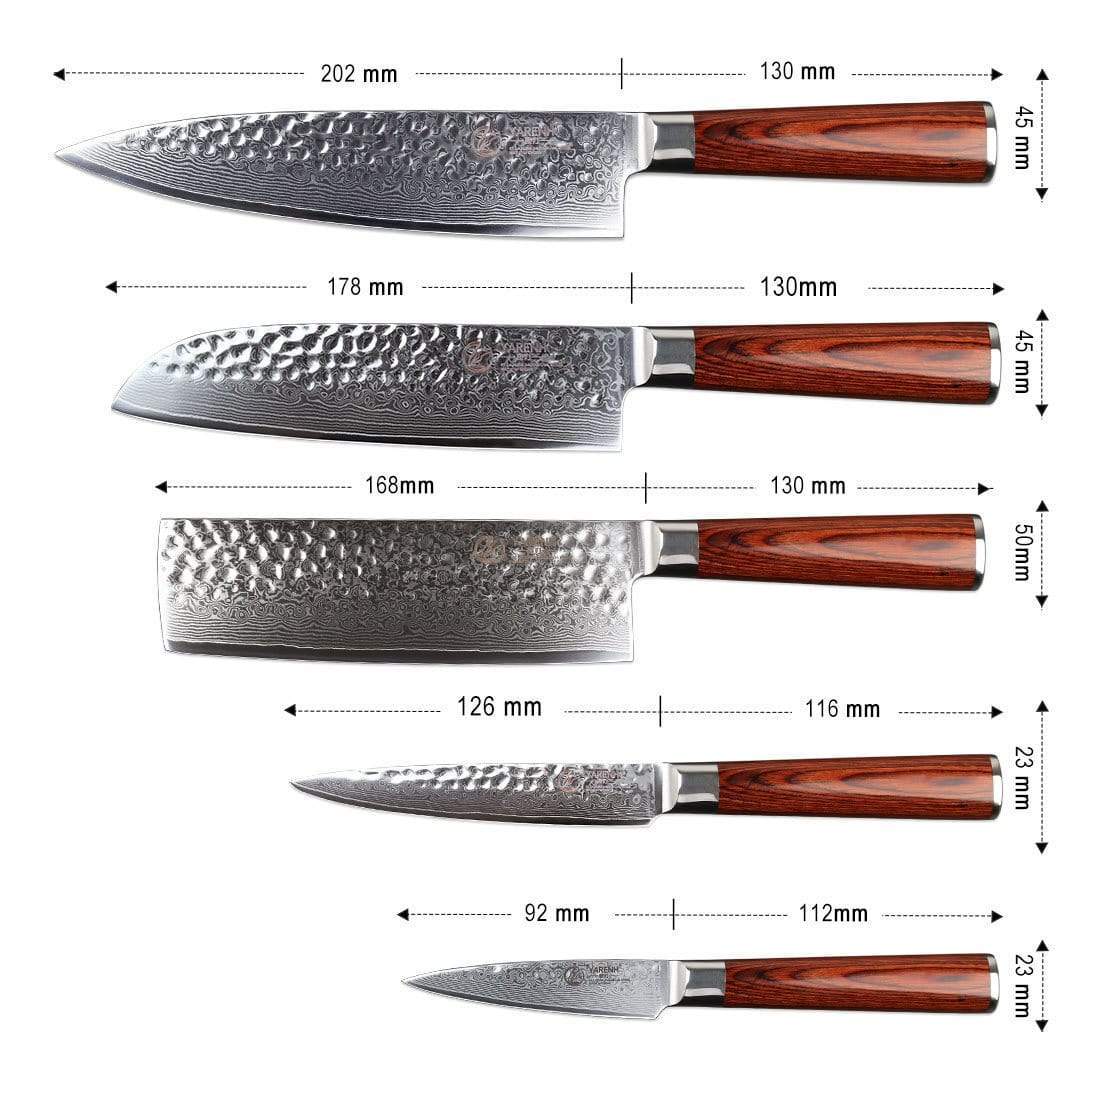 YARENH Kitchen Knife Set without Block, 5 Piece Professional Sharp Chef  Knives,Damascus Stainless Steel, 73 Layers, Full Tang, Dalbergia Wood  Handle